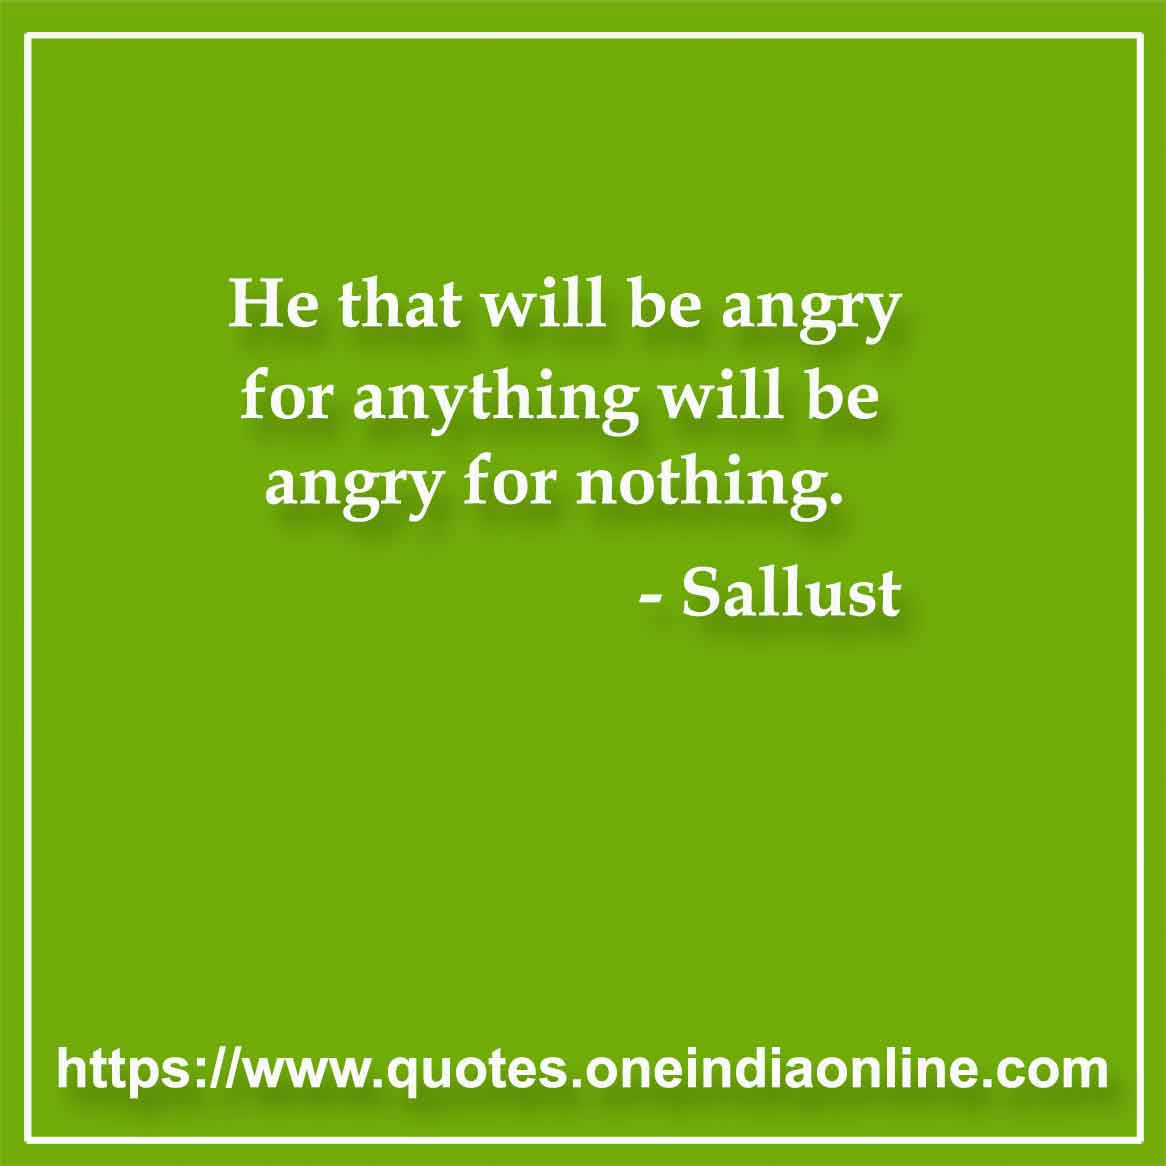 He that will be angry for anything will be angry for nothing. 

- Angry Quotes in English by Sallust